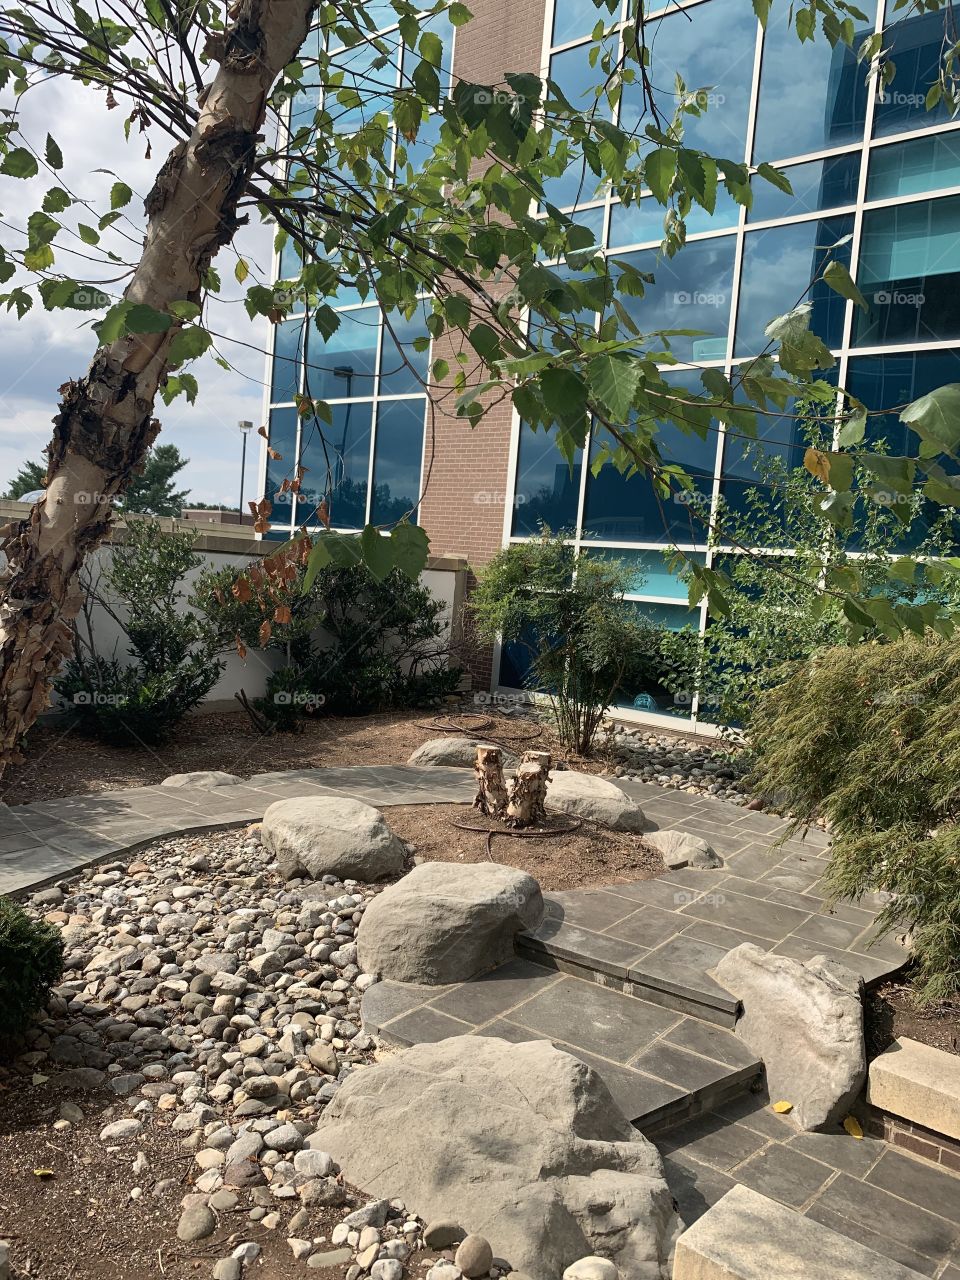 The healing garden at Fairfax Hospital. Mother Nature is healing to soothe your aches and pains and calm your troubles. Landscape Scene. Beautiful set-up.